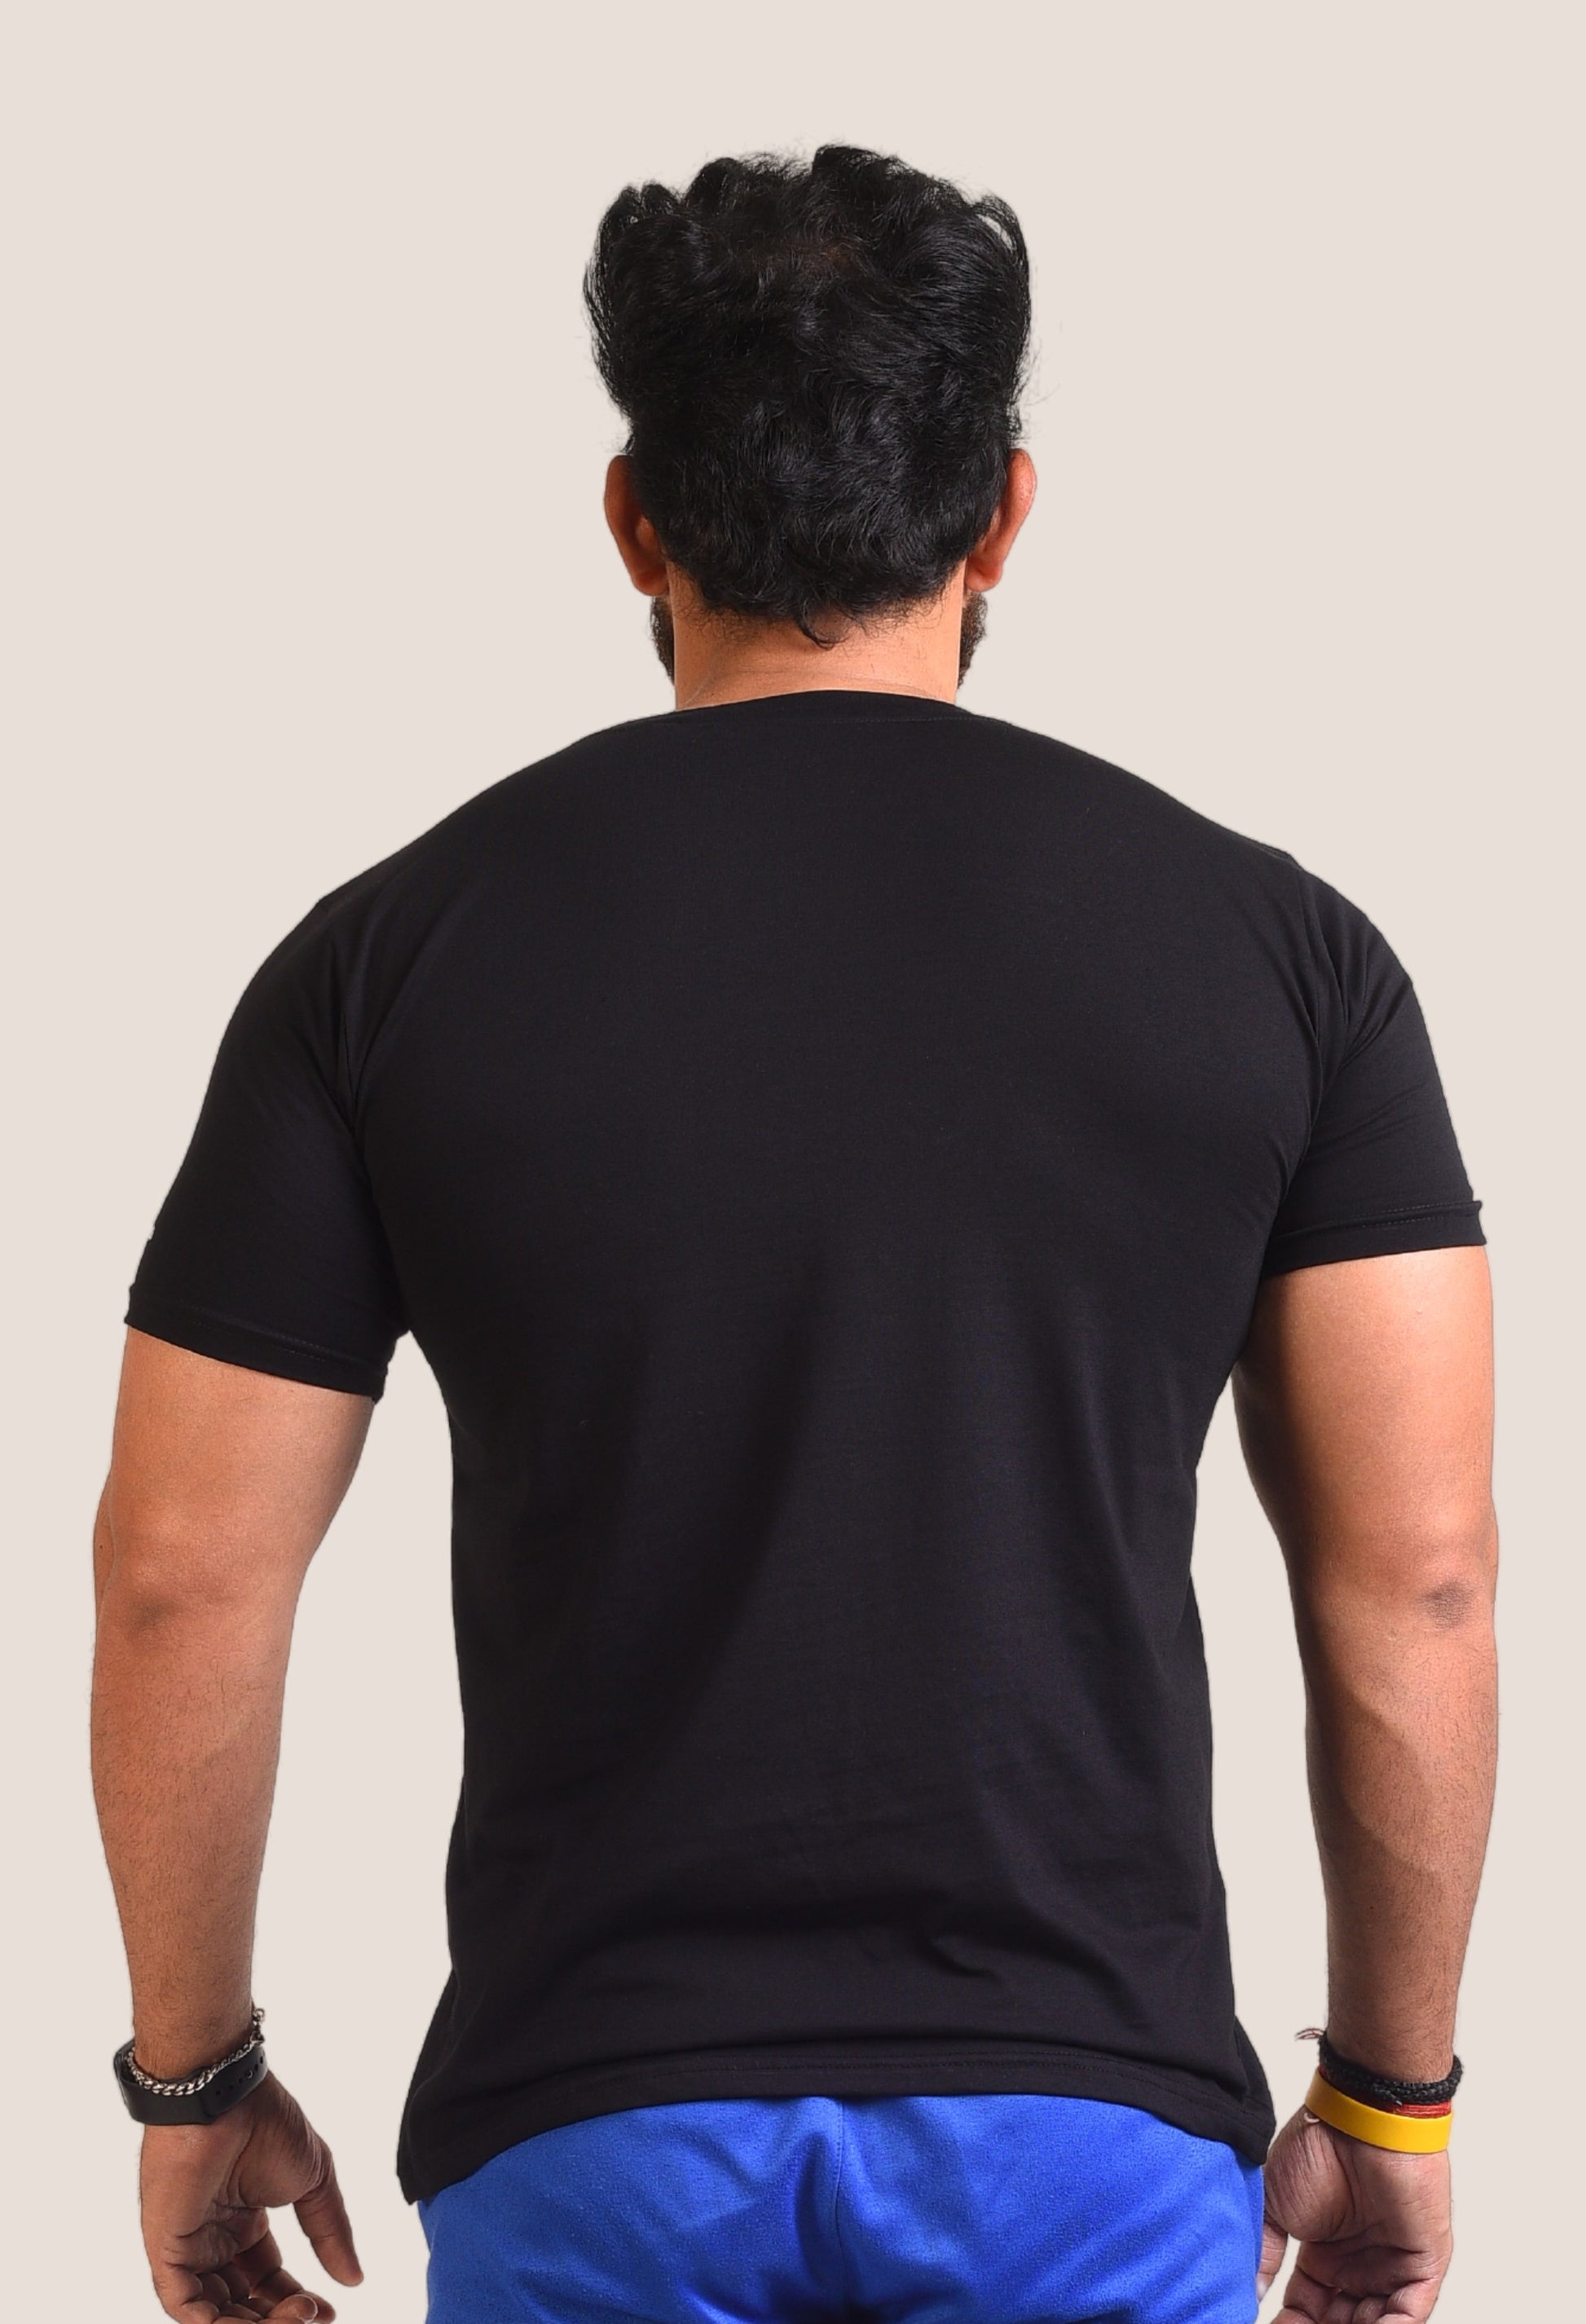 Gym T Shirt - Need A Little Pre - Men T-Shirt with premium cotton Lycra. The Sports T Shirt by Strong Soul